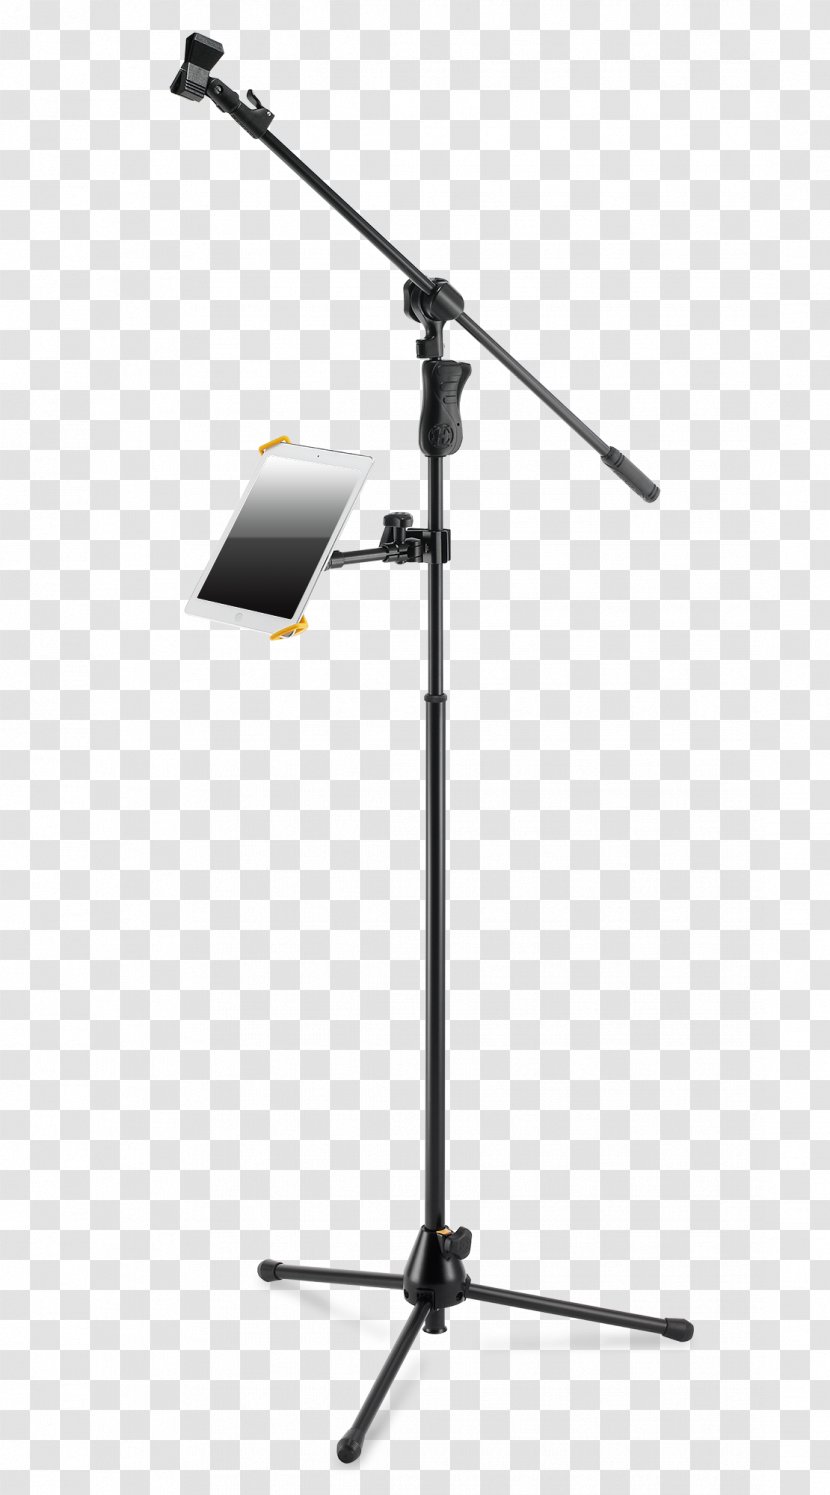 Kindle Fire IPad Amazon.com Inch Microphone Stands - Tree - Ipad Transparent PNG